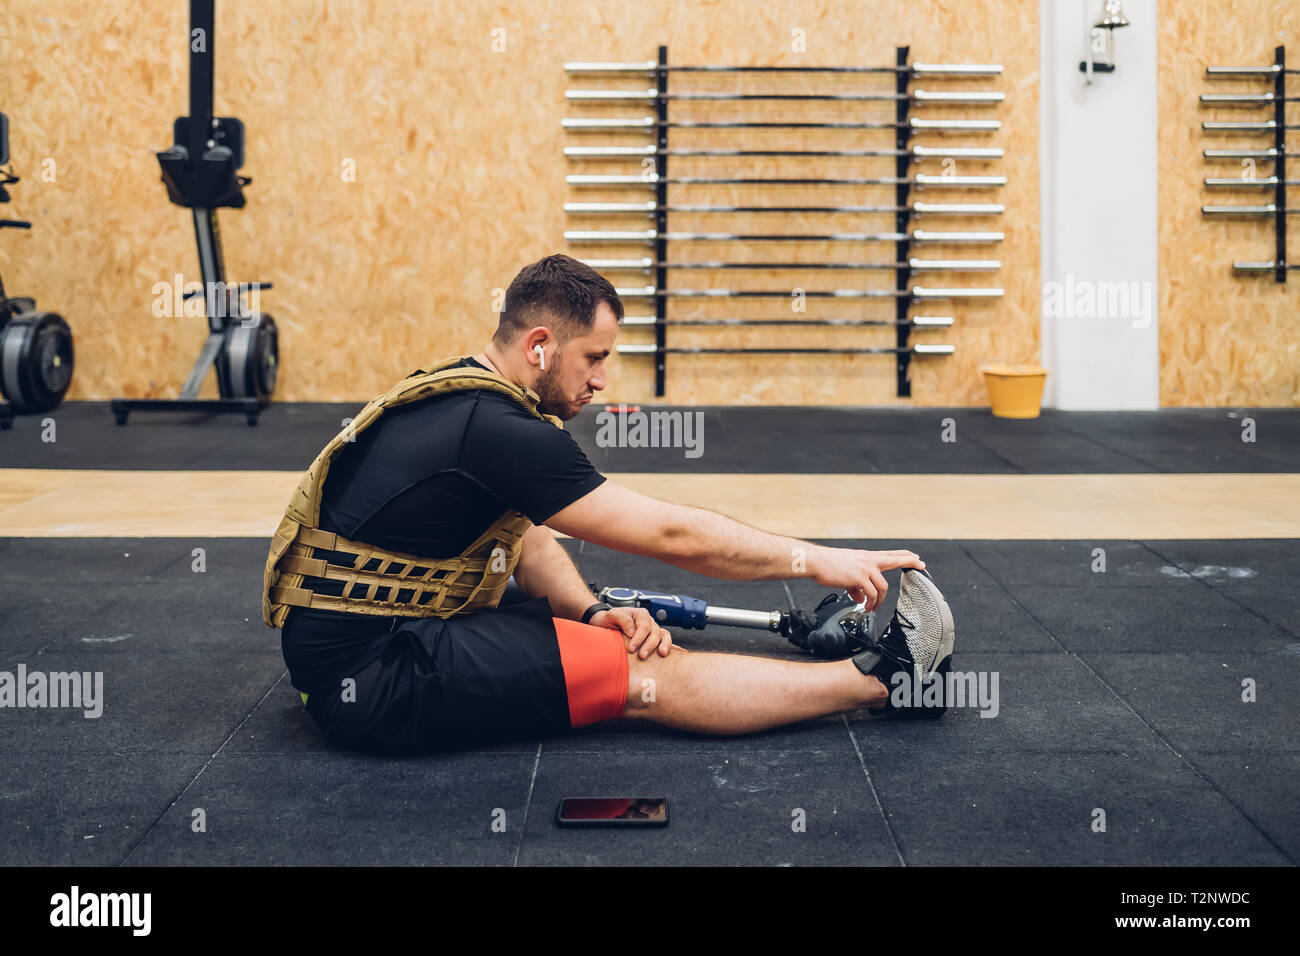 Man with prosthetic leg stretching on gym floor Stock Photo